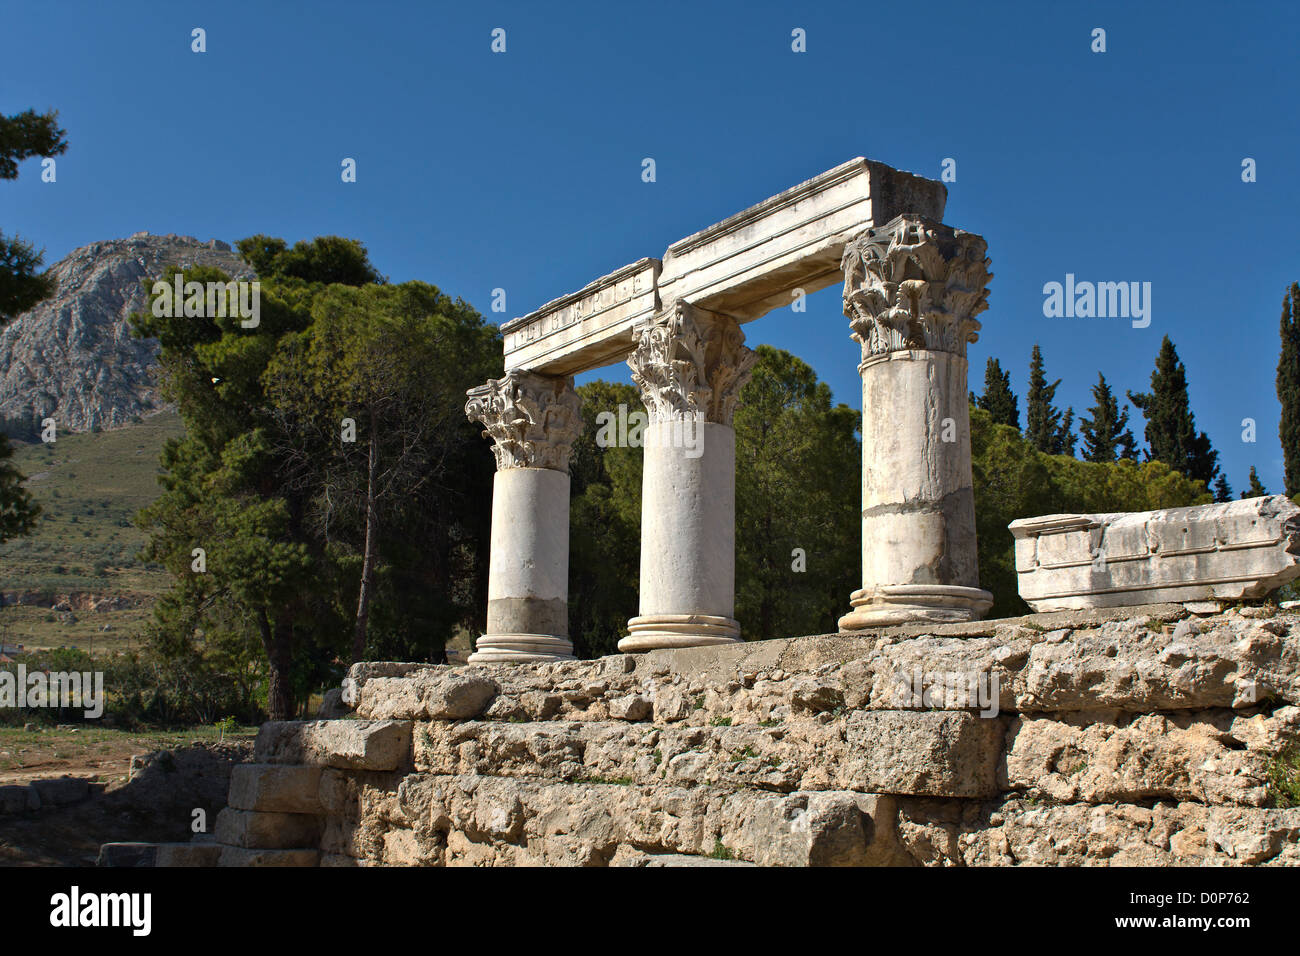 Ancient Corinth site at Peloponnesus, Greece. Temple of Hera Stock Photo